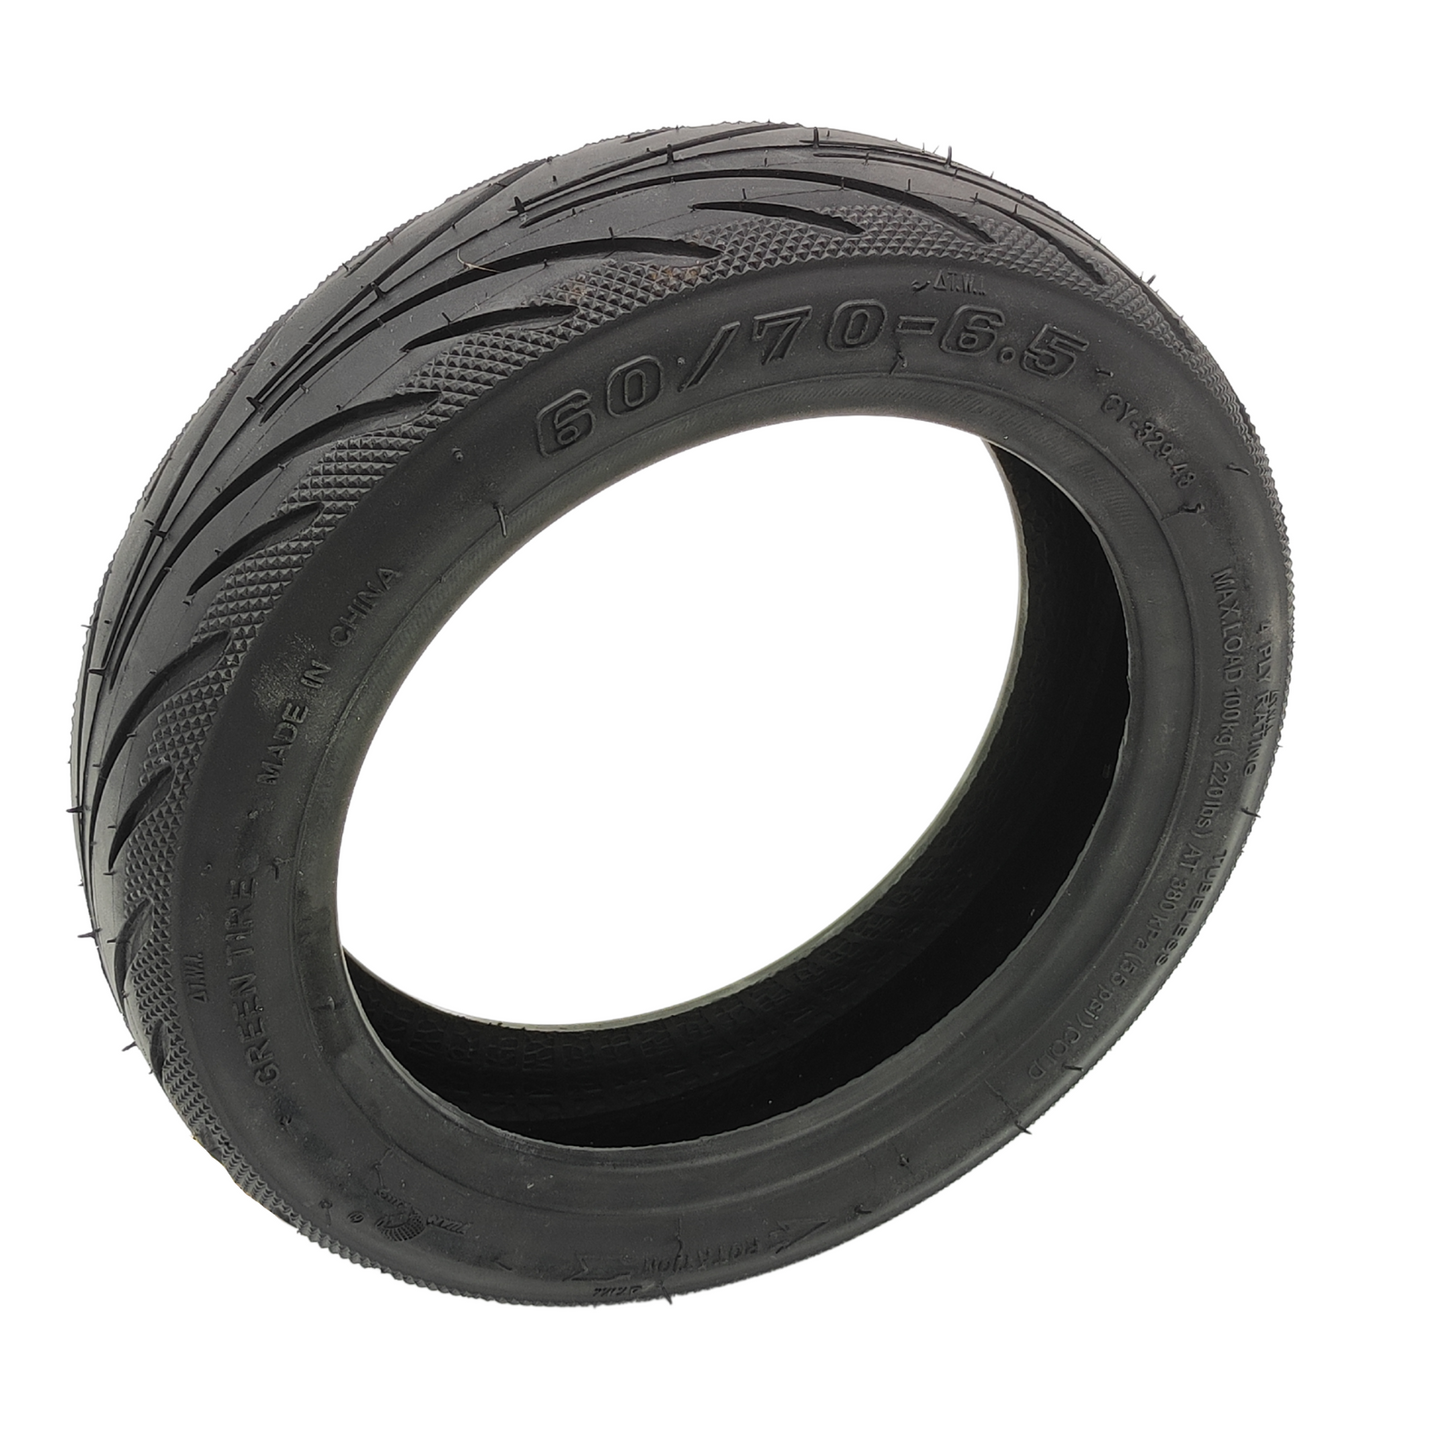 Ninebot Max G2 voorwiel tubeless 10x2.5 (60/70-6.5)